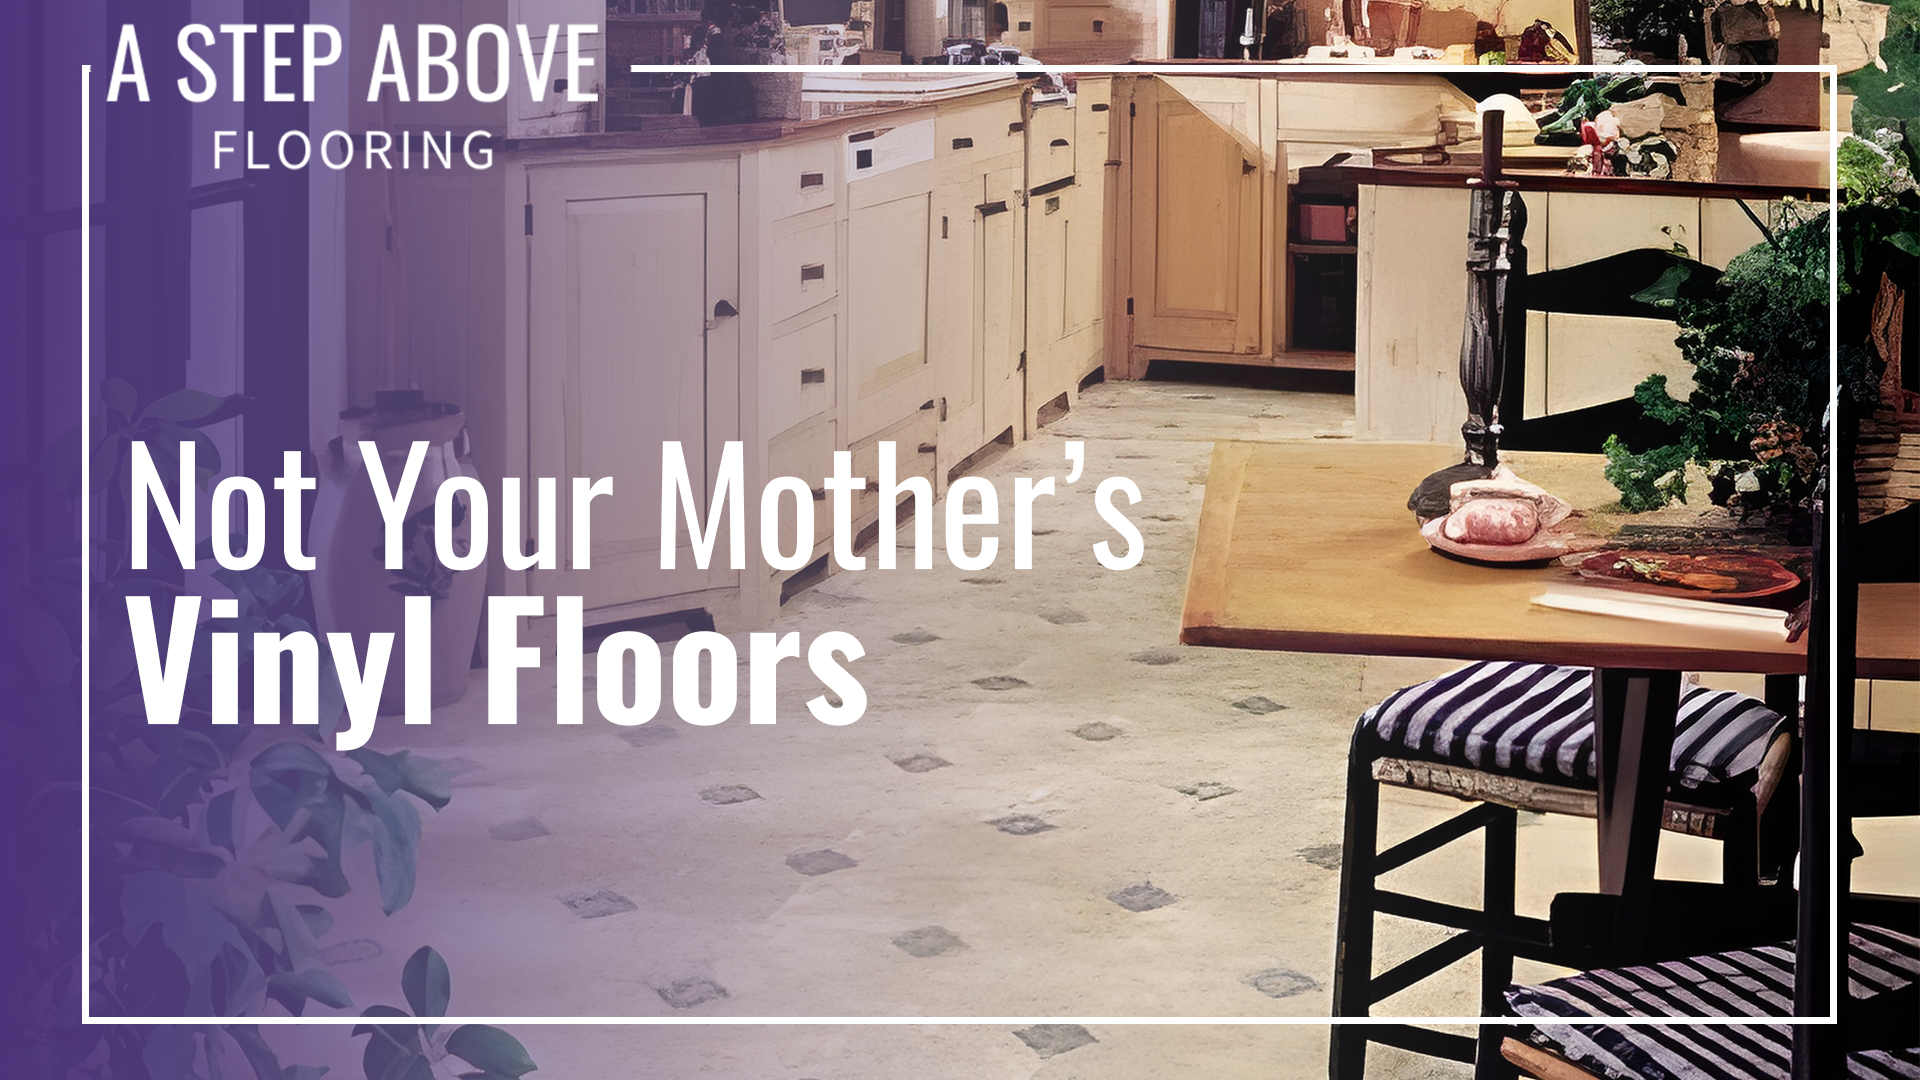 A kitchen with vinyl flooring with the text "Not Your Mother's Vinyl Floors"